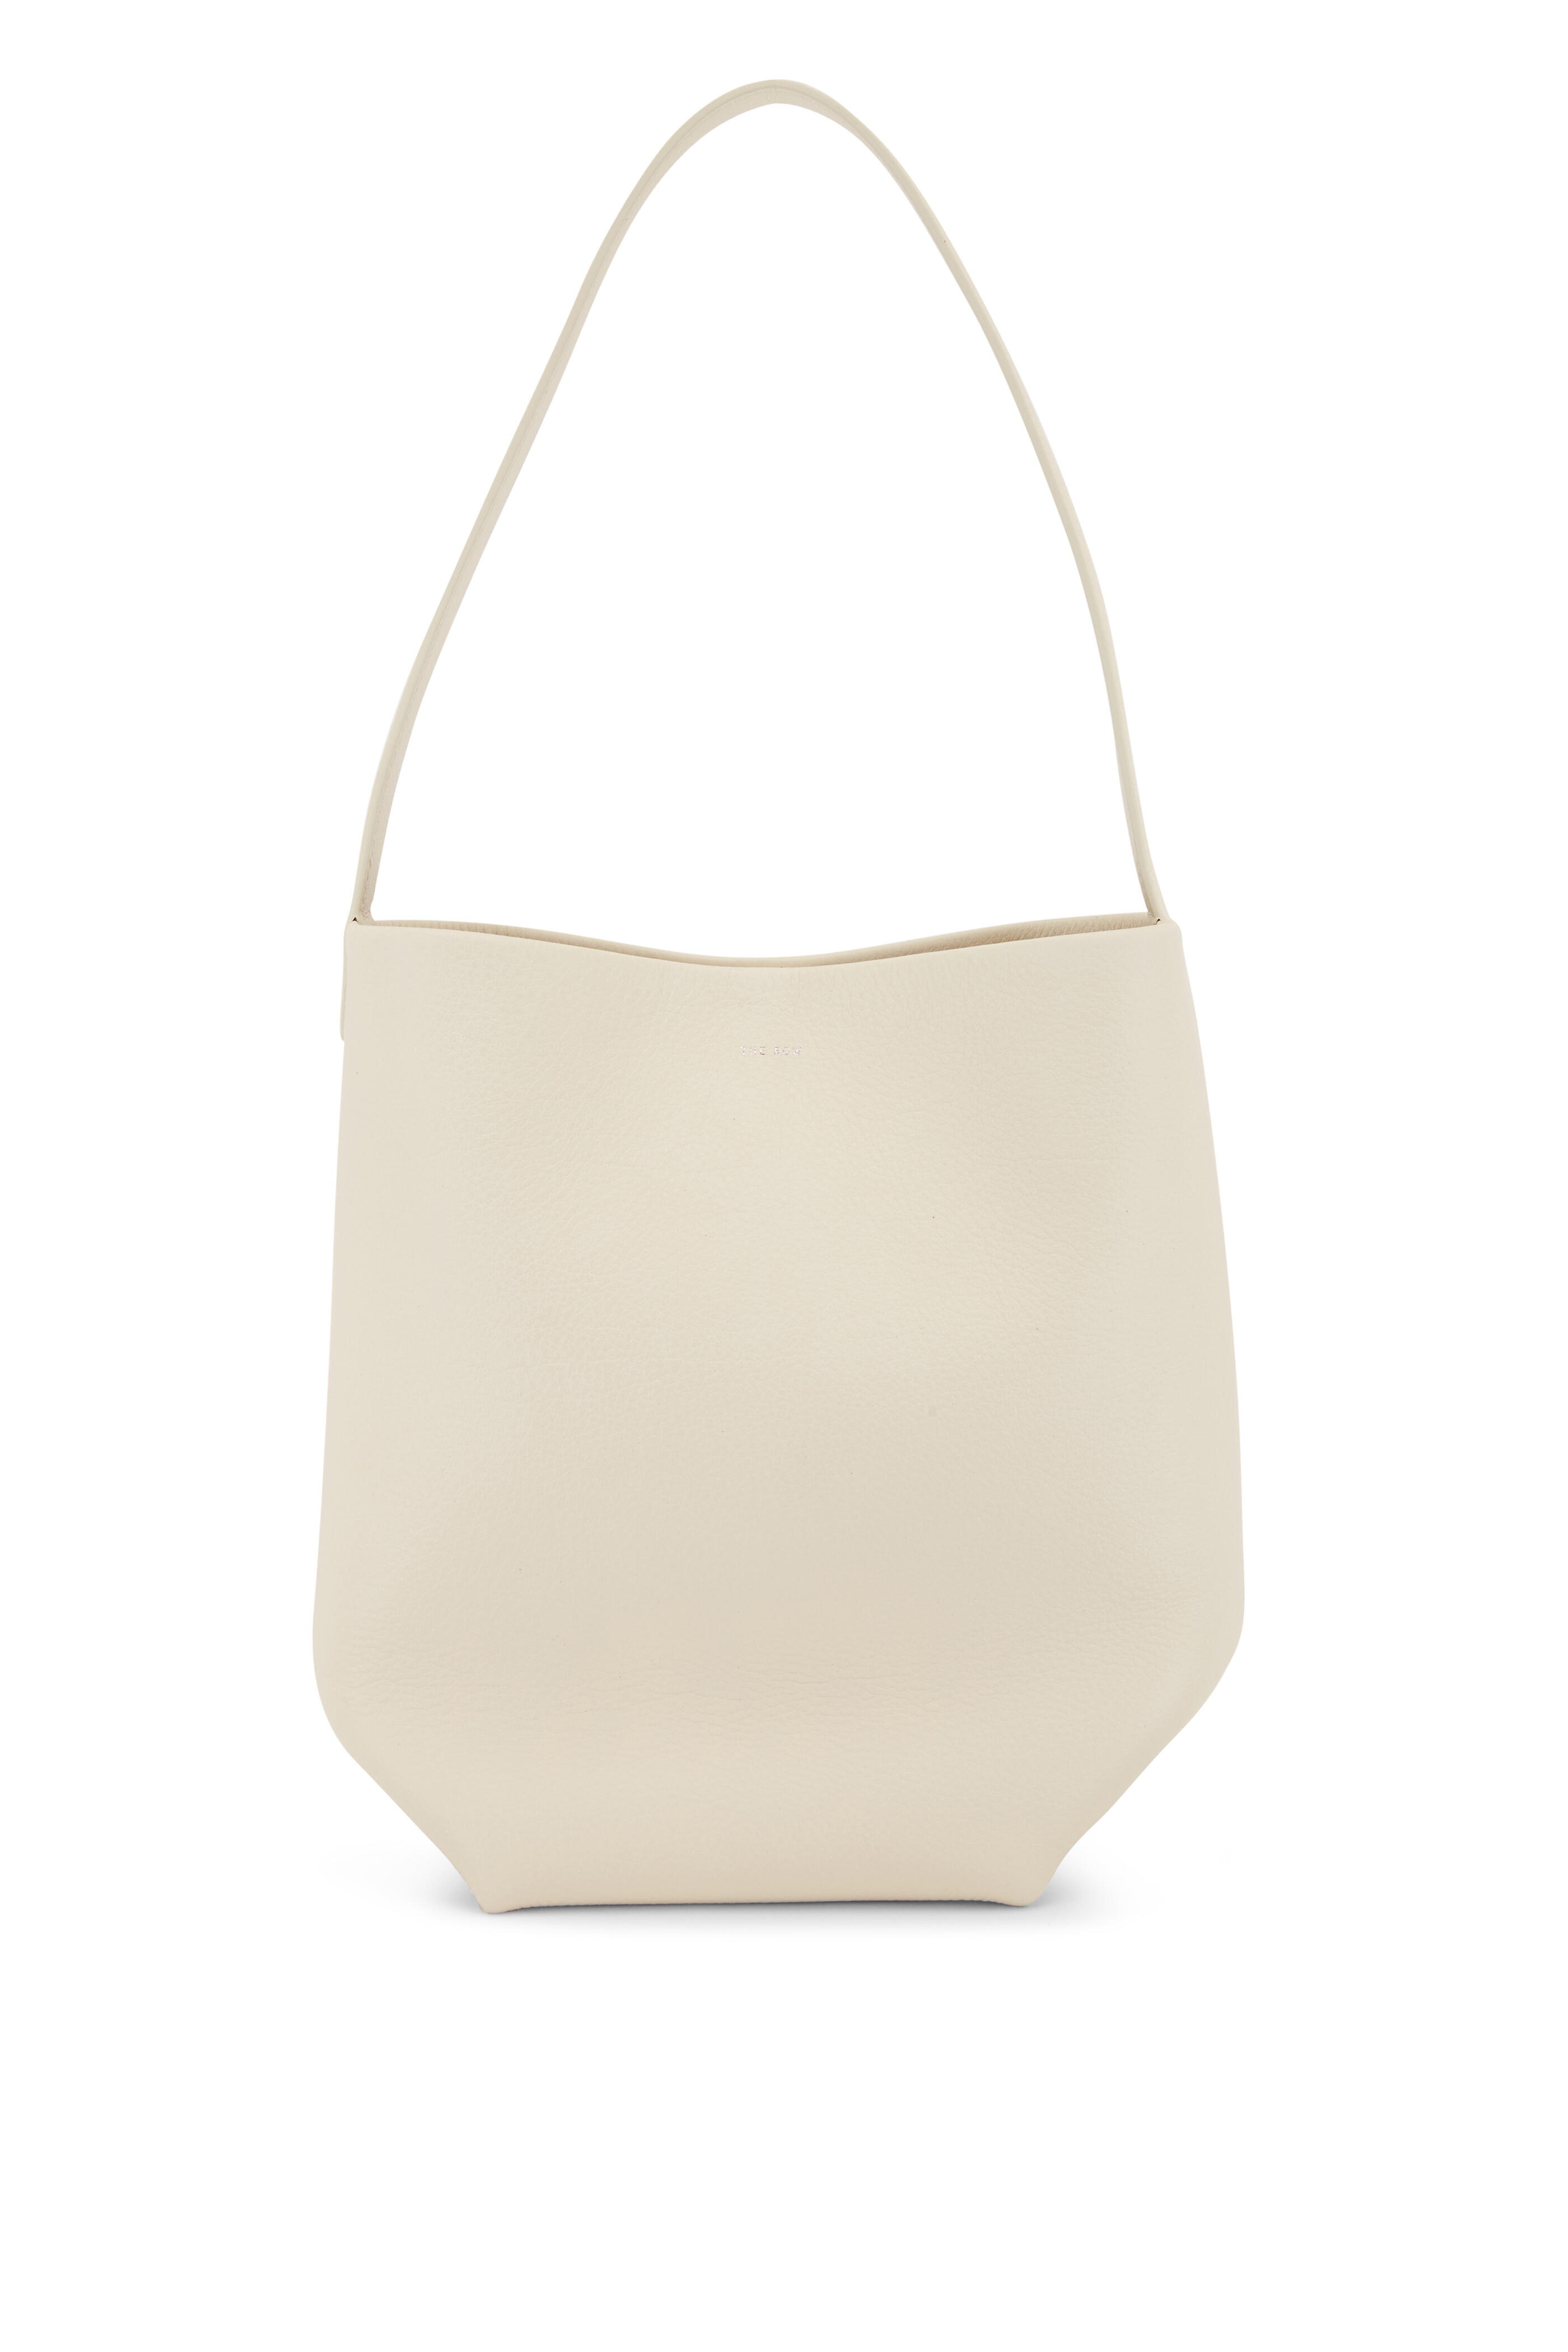 The Row Large N/s Park Tote Bag in White Pld